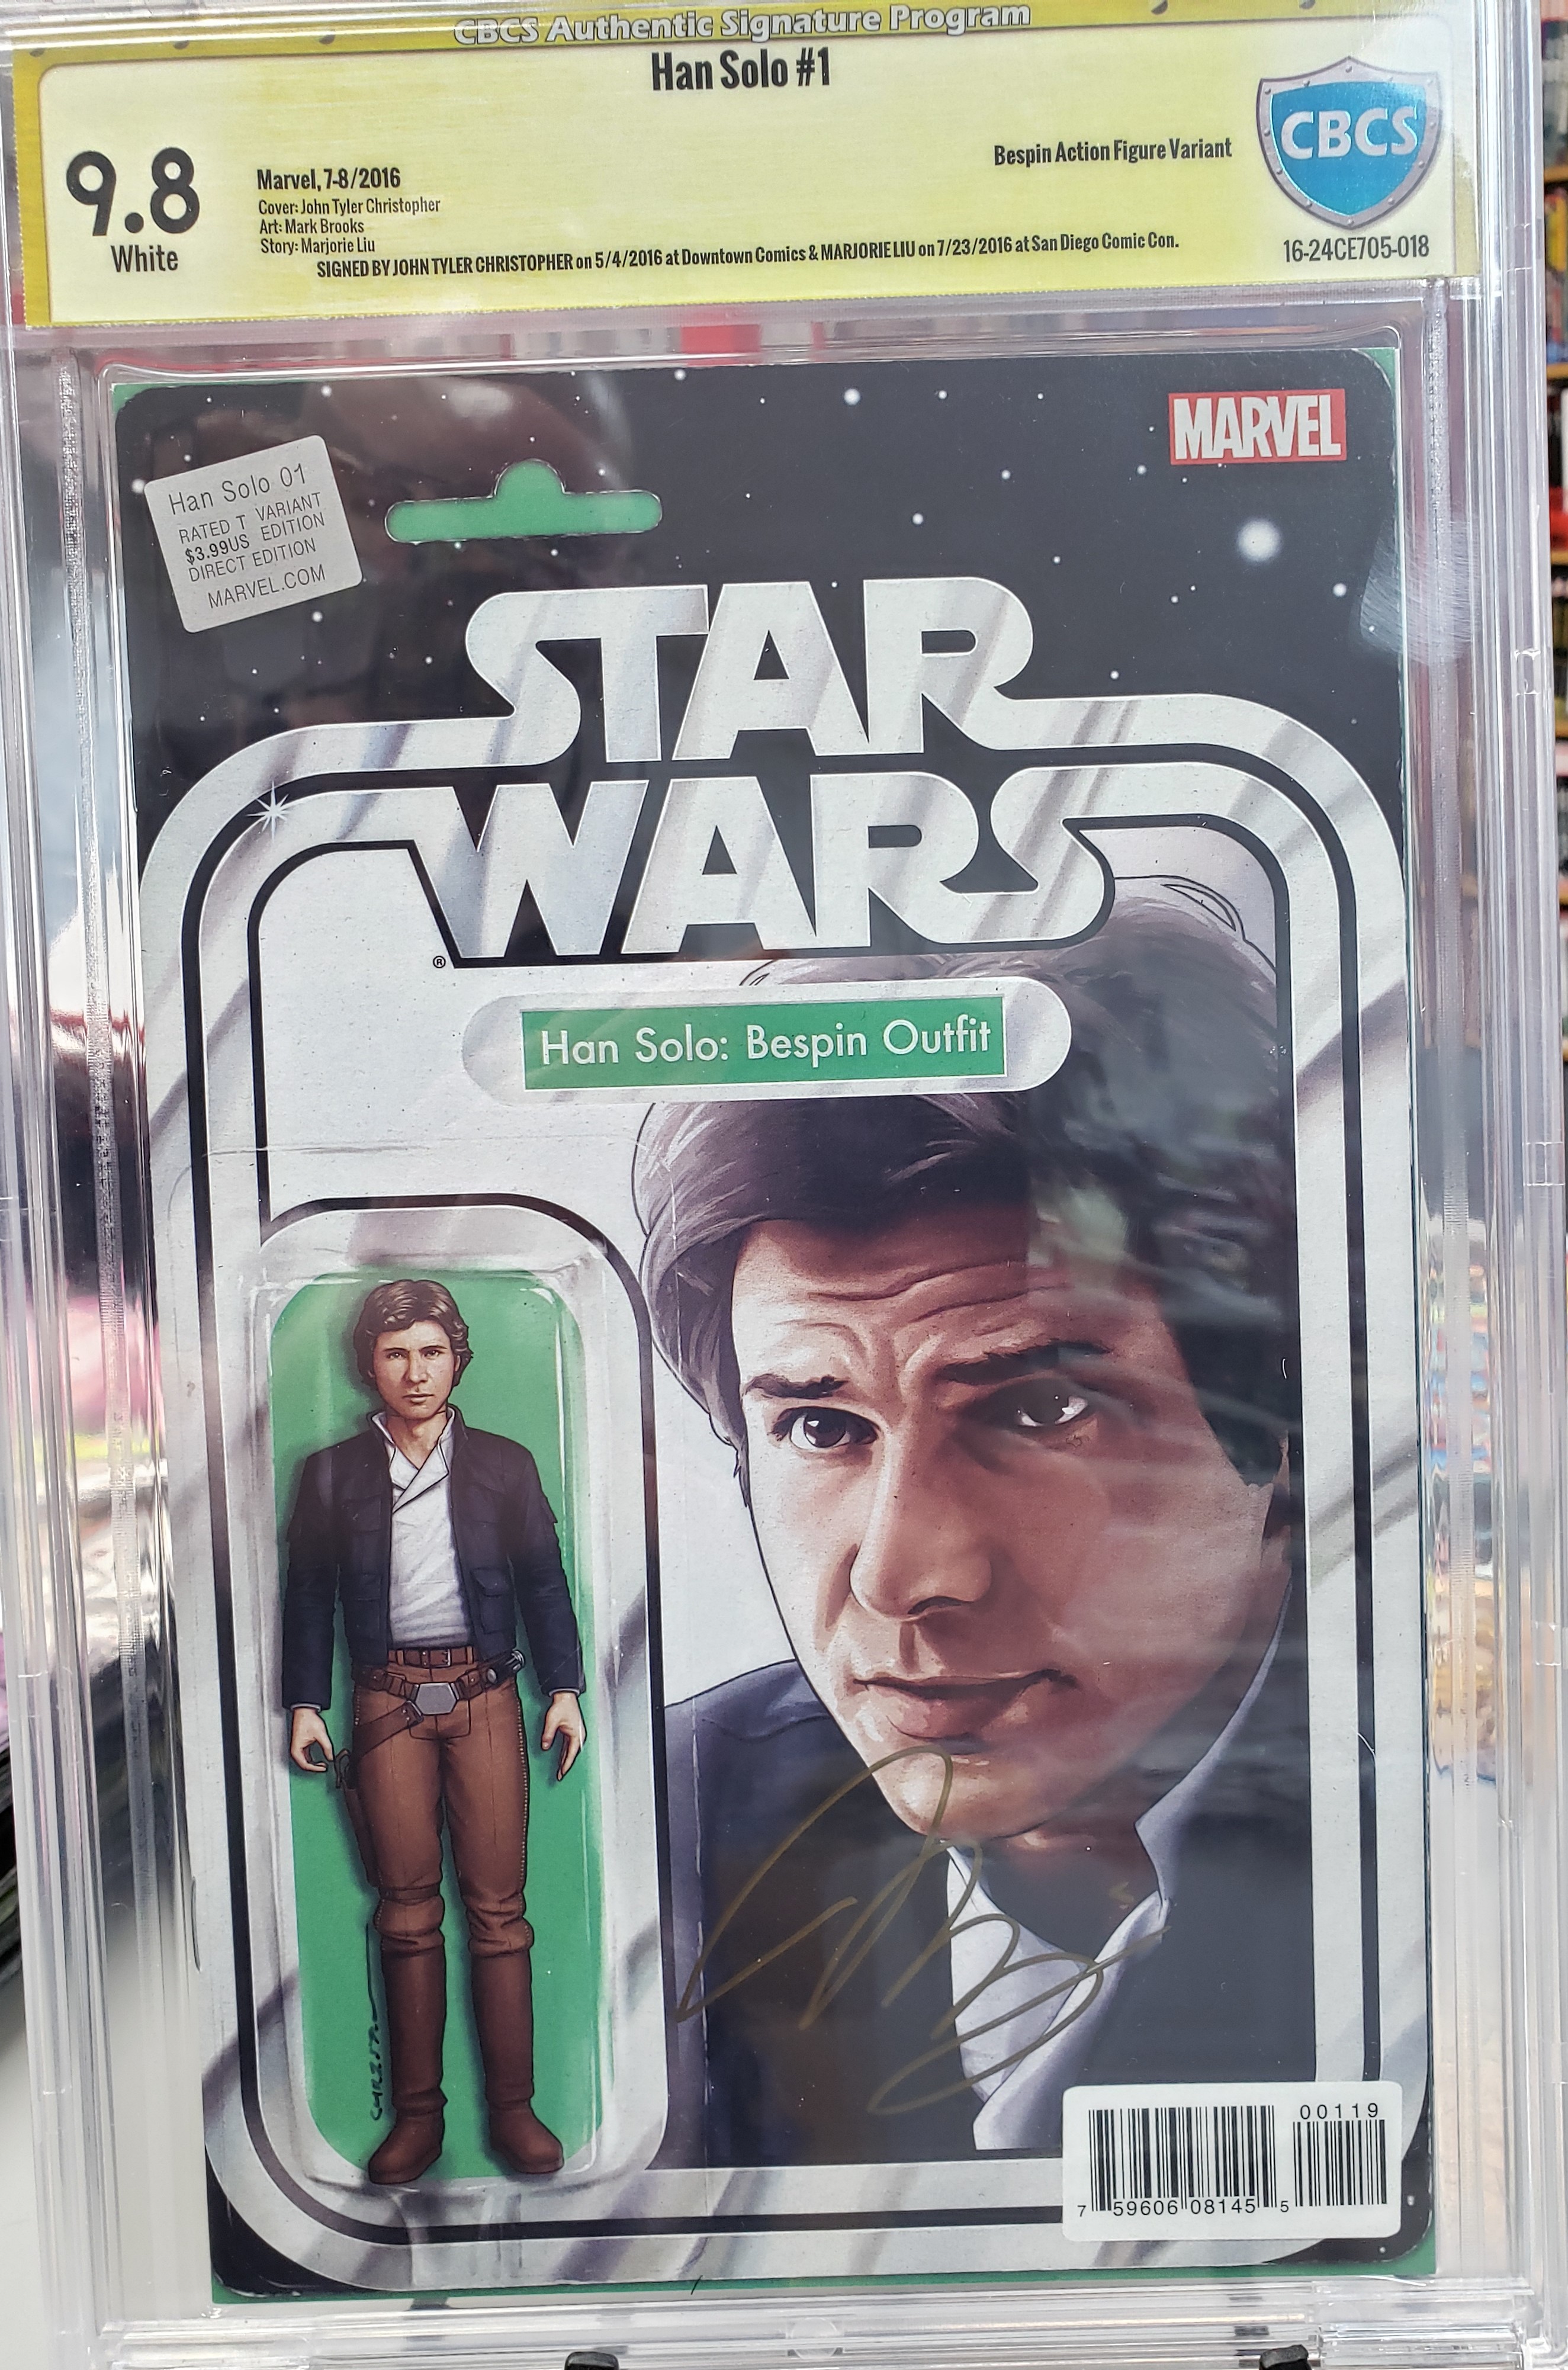 Han Solo #1 Bespin Action Figure Cover 9.8 Cbcs Signed By Jtc/Marjoire Liu